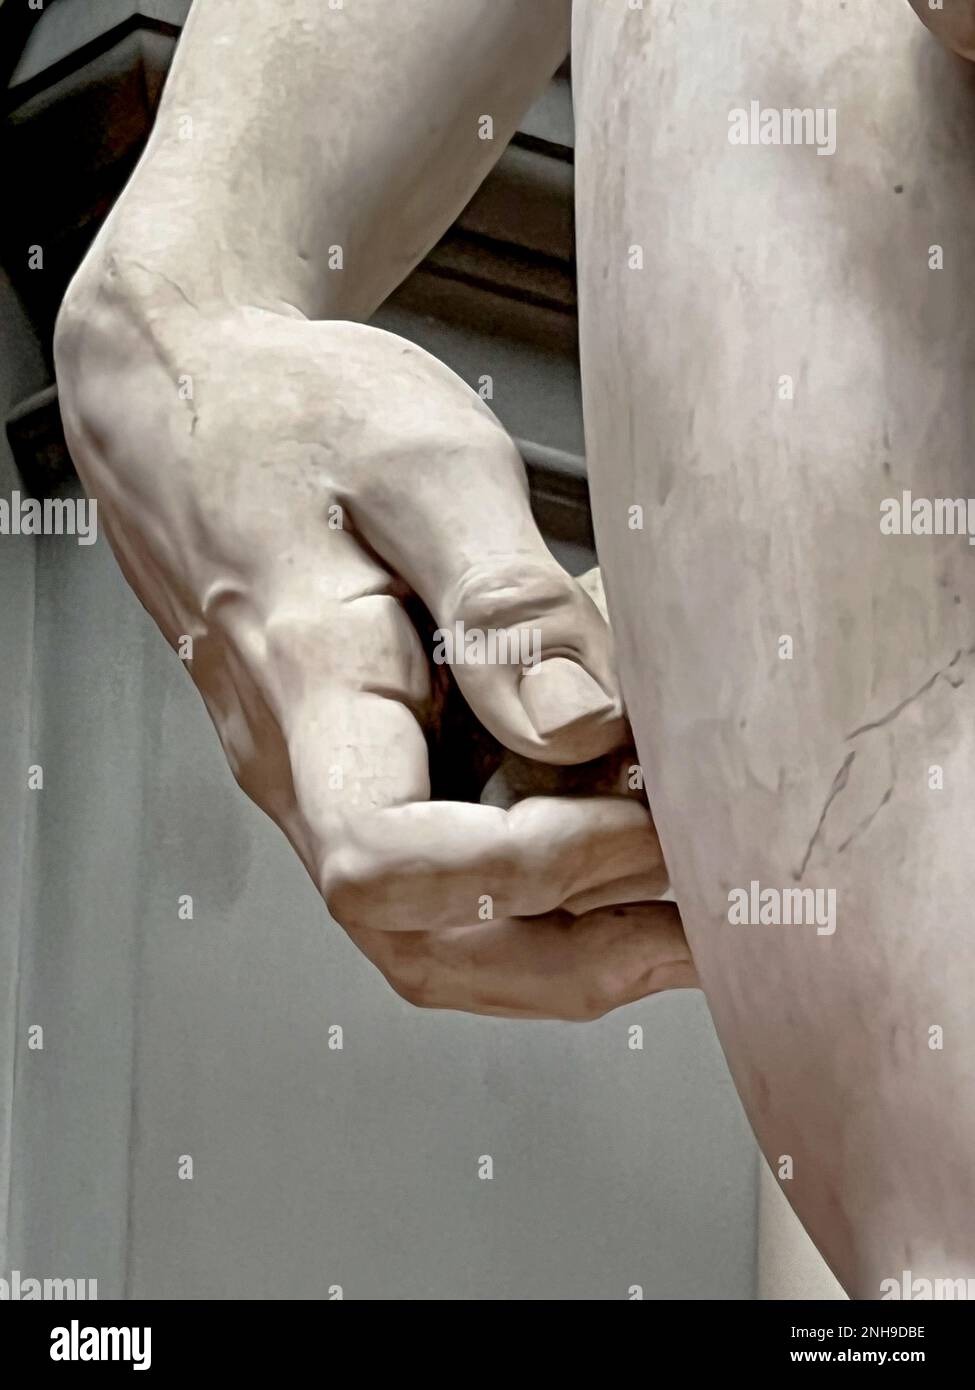 DAVID MICHELANGELO DETAIL STUDY OF RIGHT HAND 08 Stock Photo